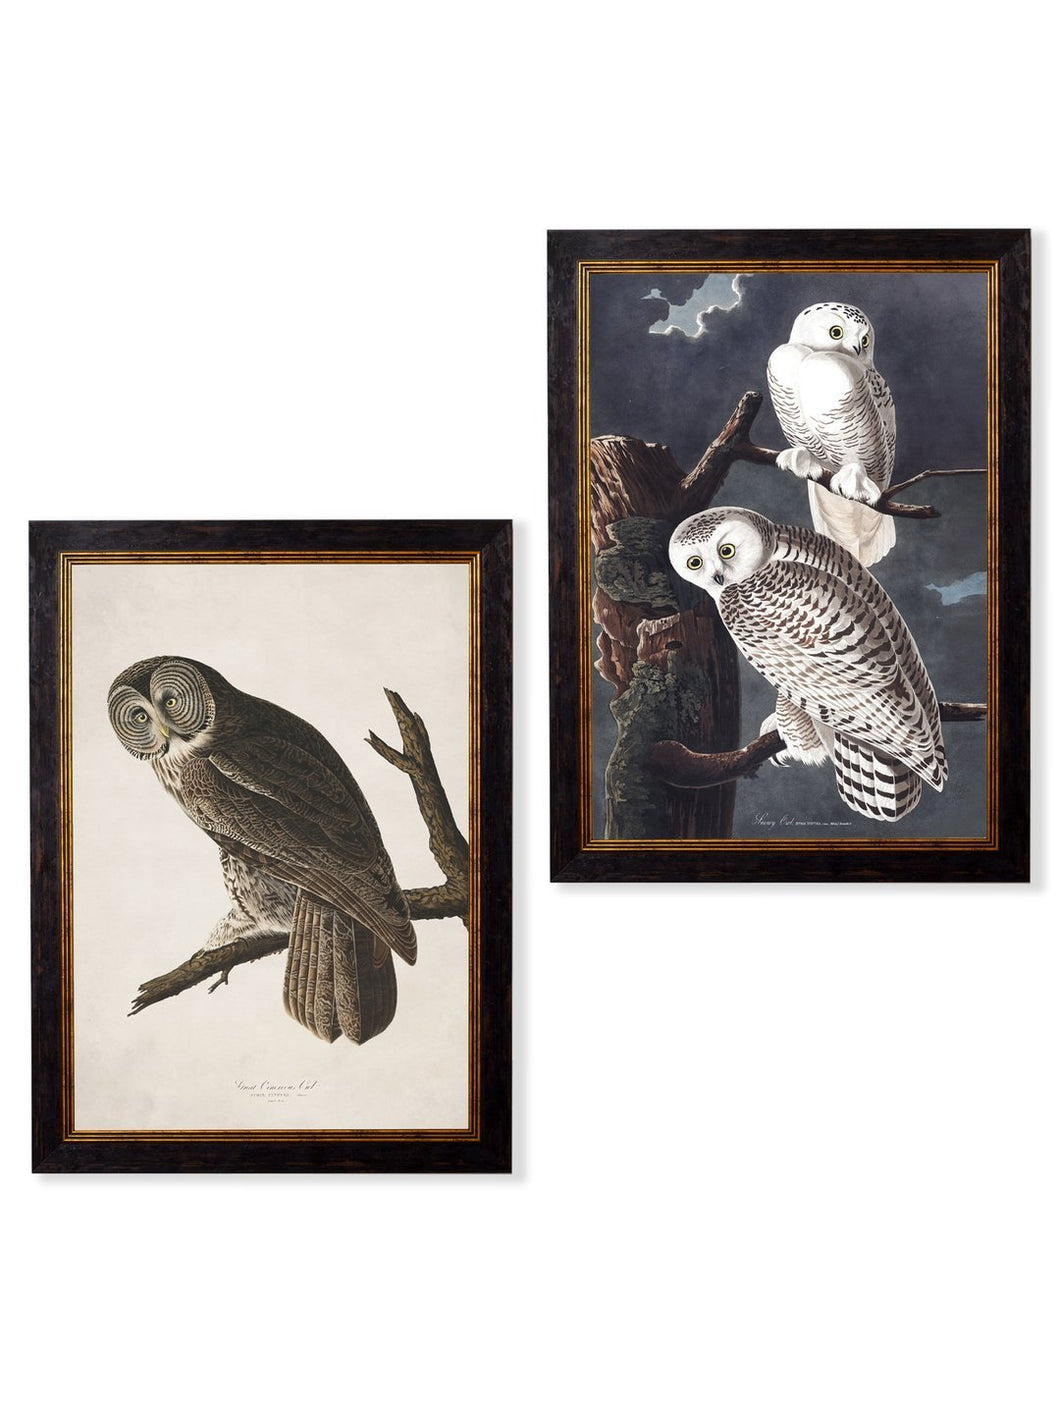 Framed Audubon's Owl Prints - Referenced From 1838 Hand Coloured Aubudon PrintsVintage Frog T/APictures & Prints